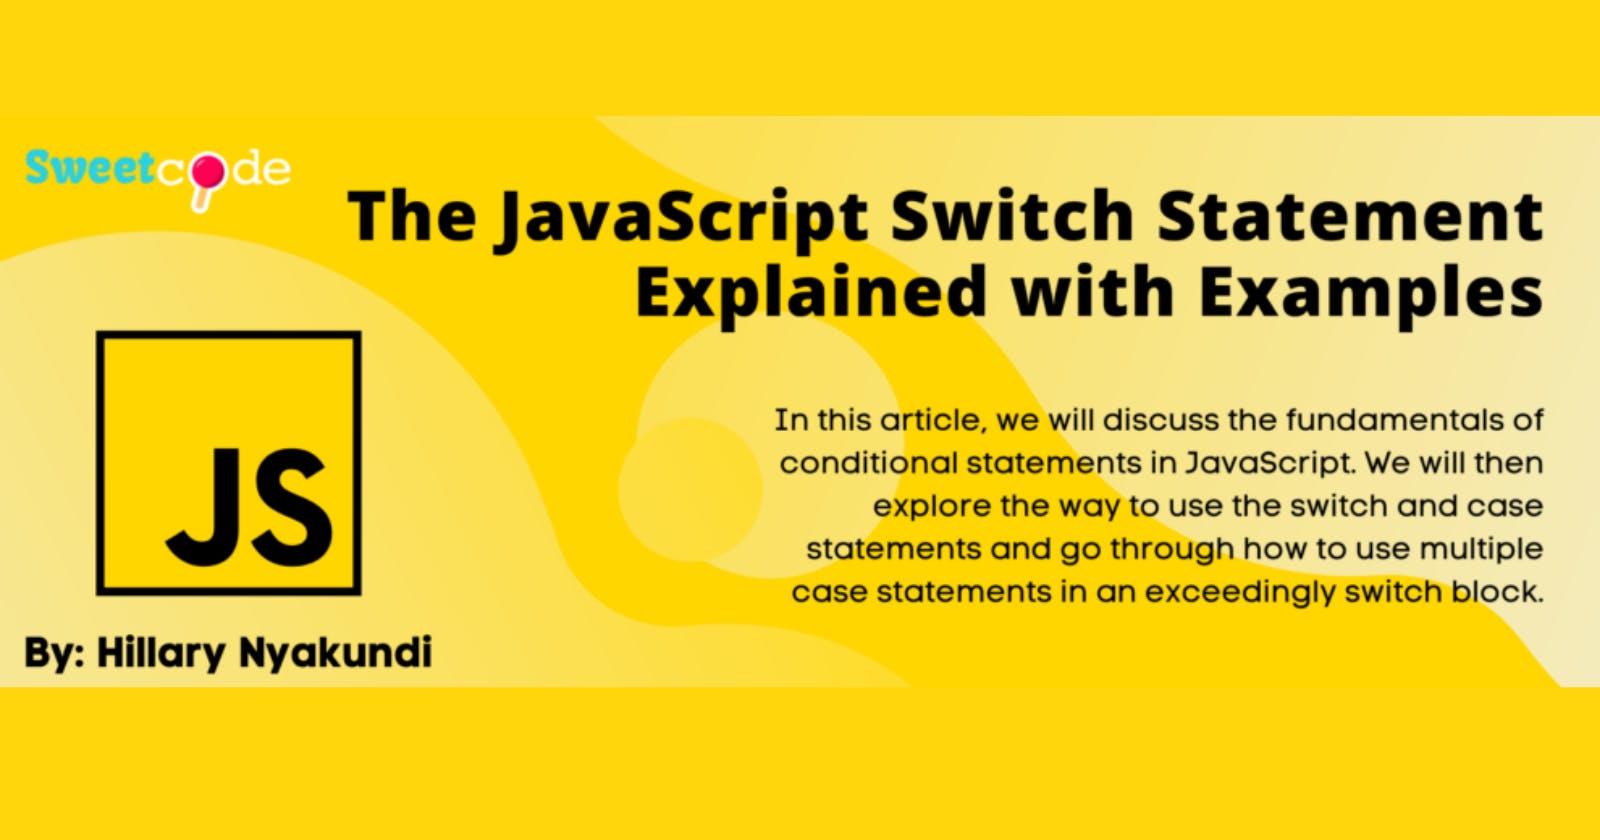 The JavaScript Switch Statement Explained with Examples